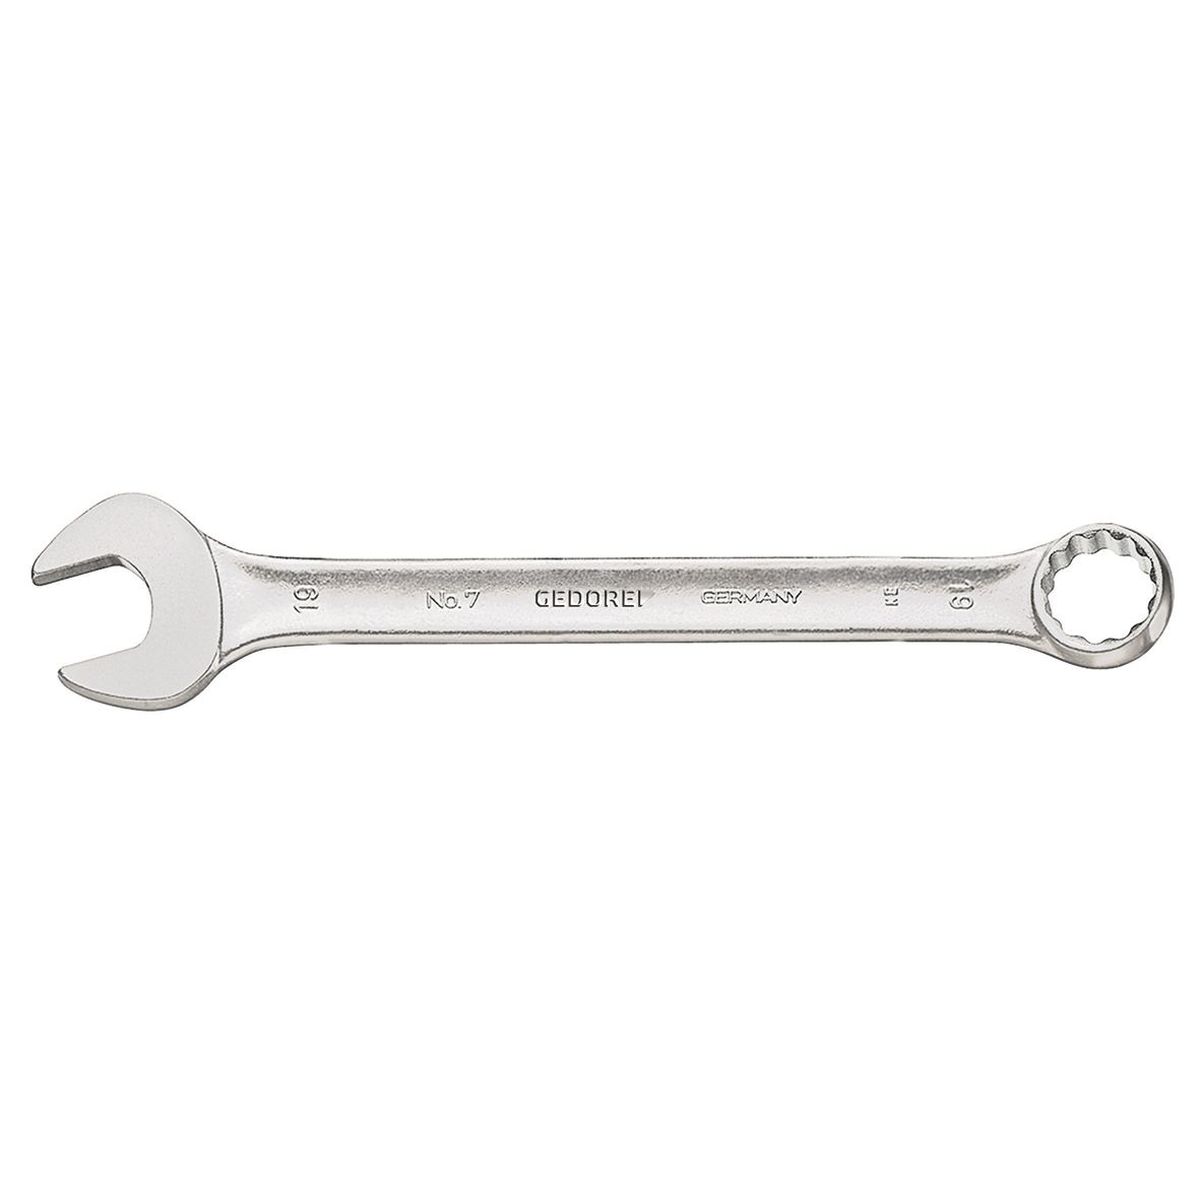 Combination spanner 36mm No.7 36 Gedore